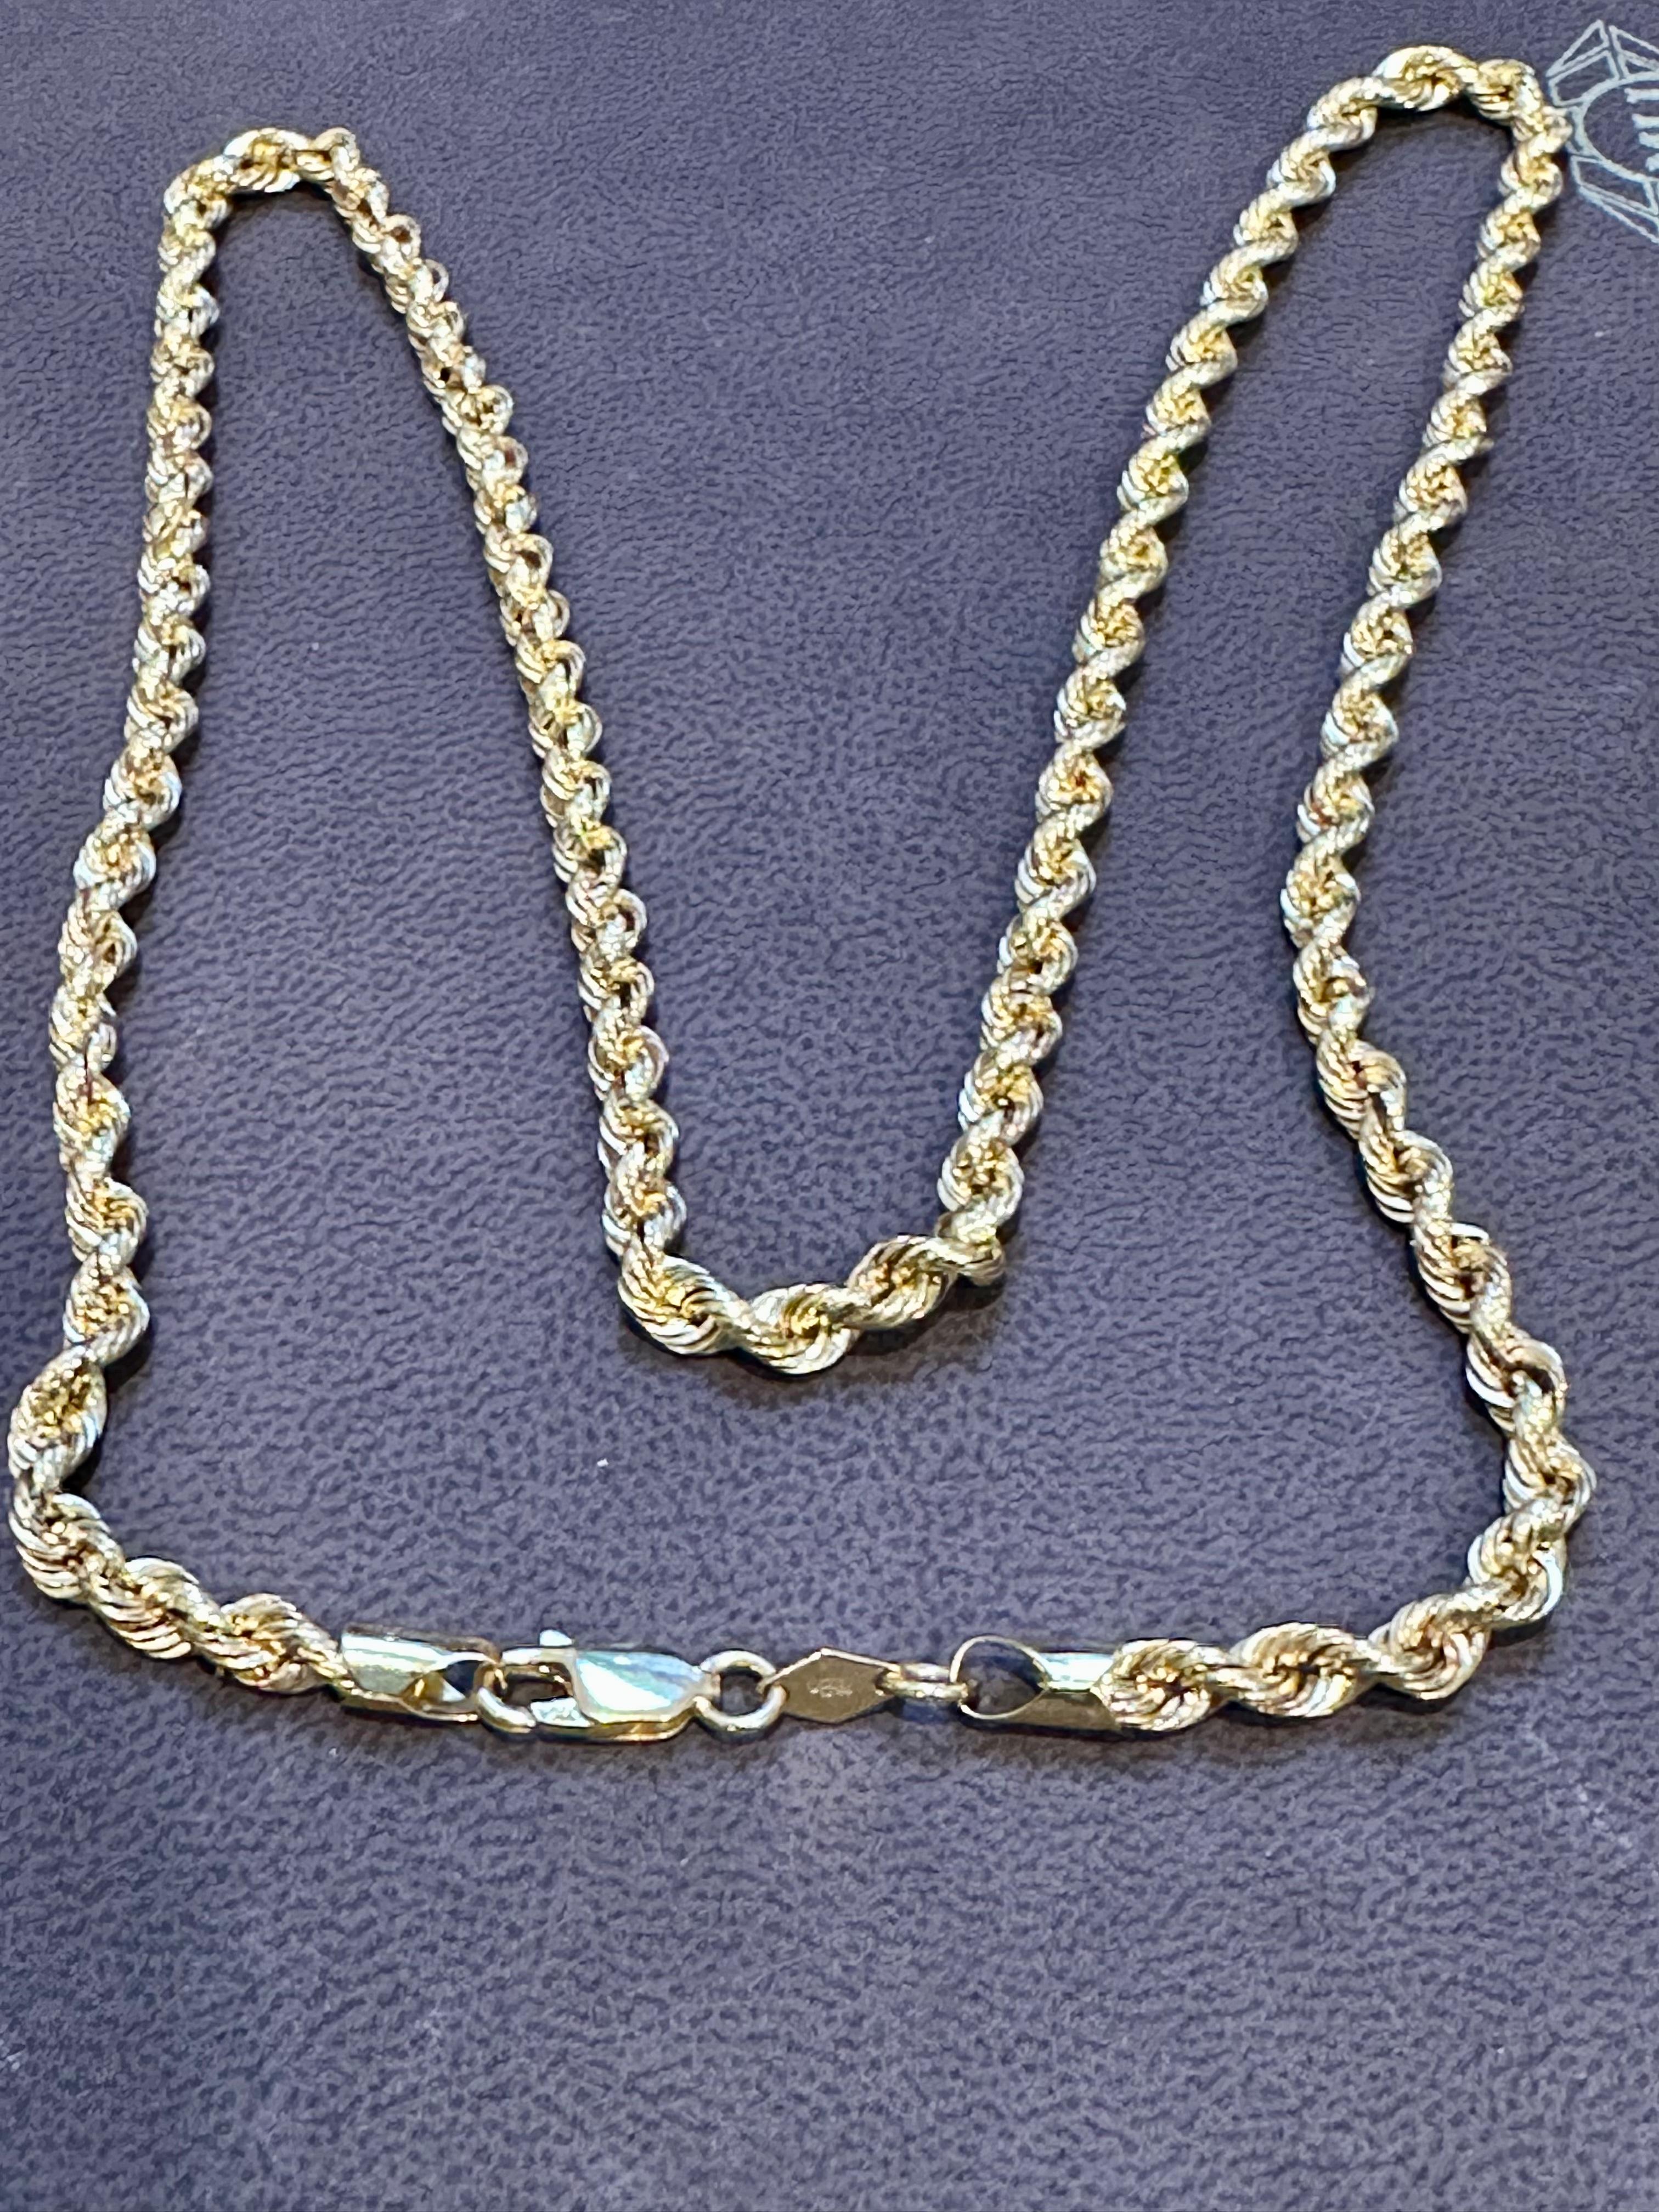 Vintage 14 Karat Yellow Gold 8.3 Gm, Rope Chain Necklace For Sale 5